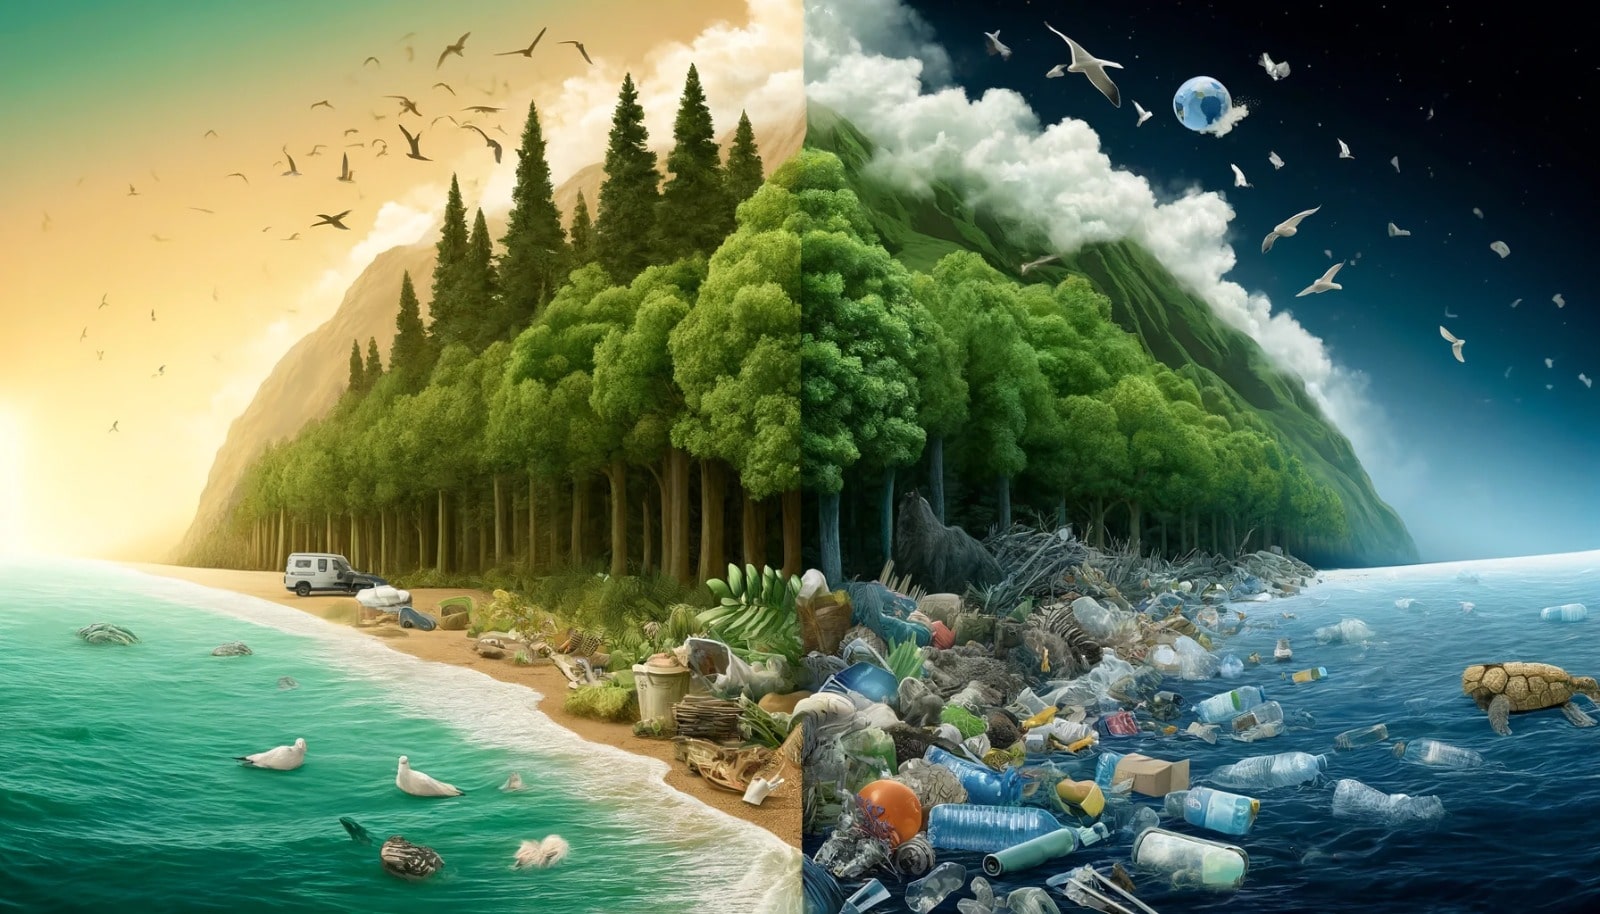 Which is more sustainable: Paper or Plastic?